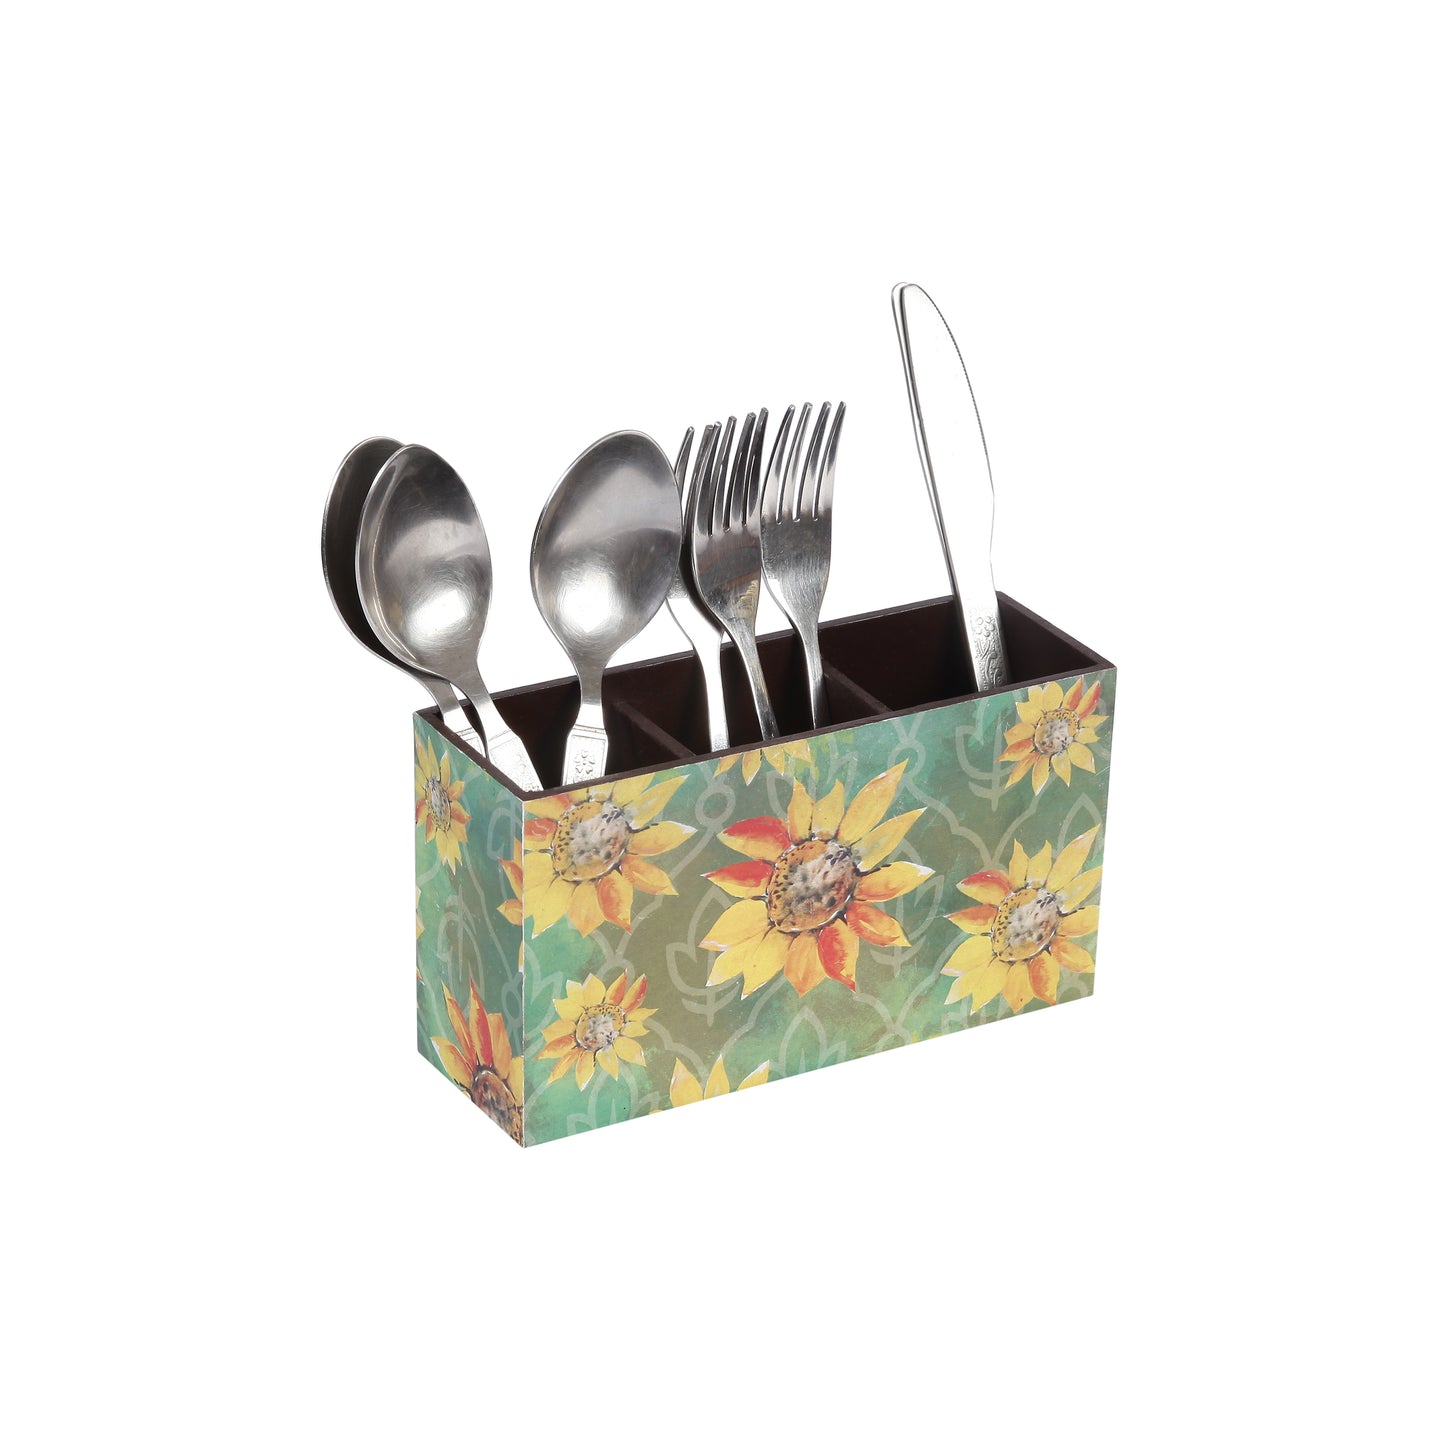 A Tiny Mistake Sunflowers Wooden Cutlery Holder, 18 x 10 x 6.5 cm